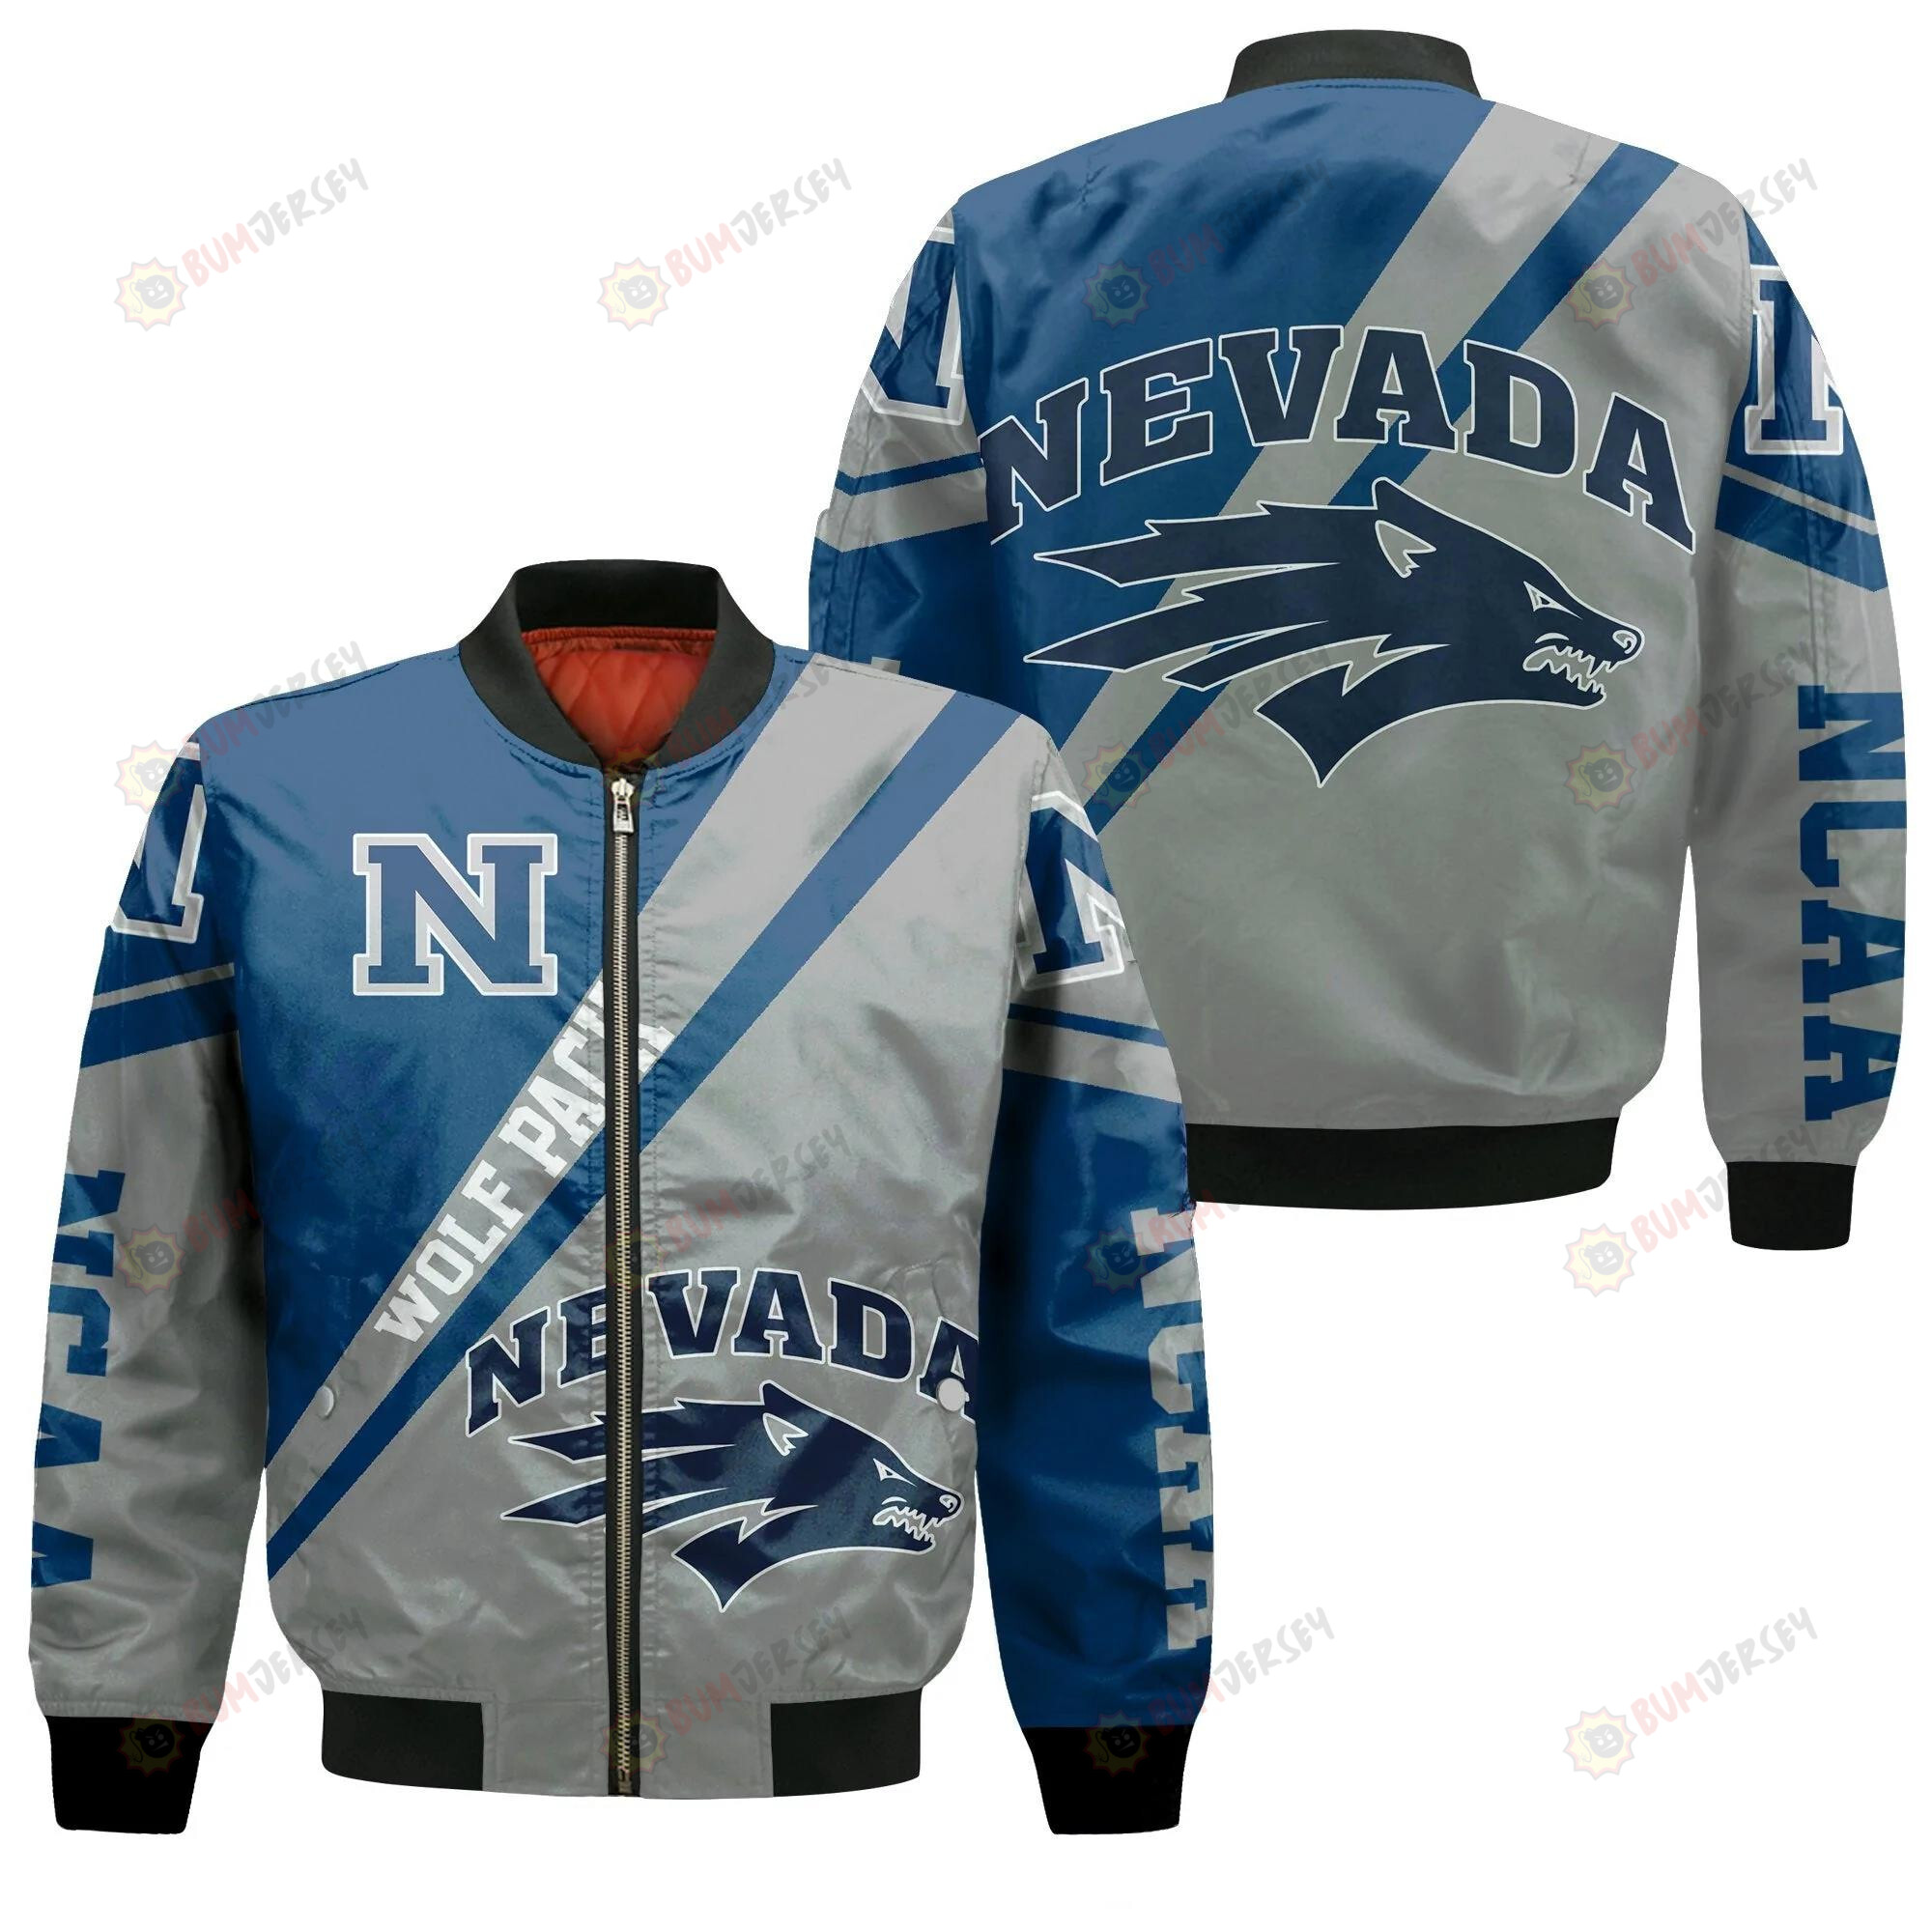 Nevada Wolf Pack Logo Bomber Jacket 3D Printed Cross Style